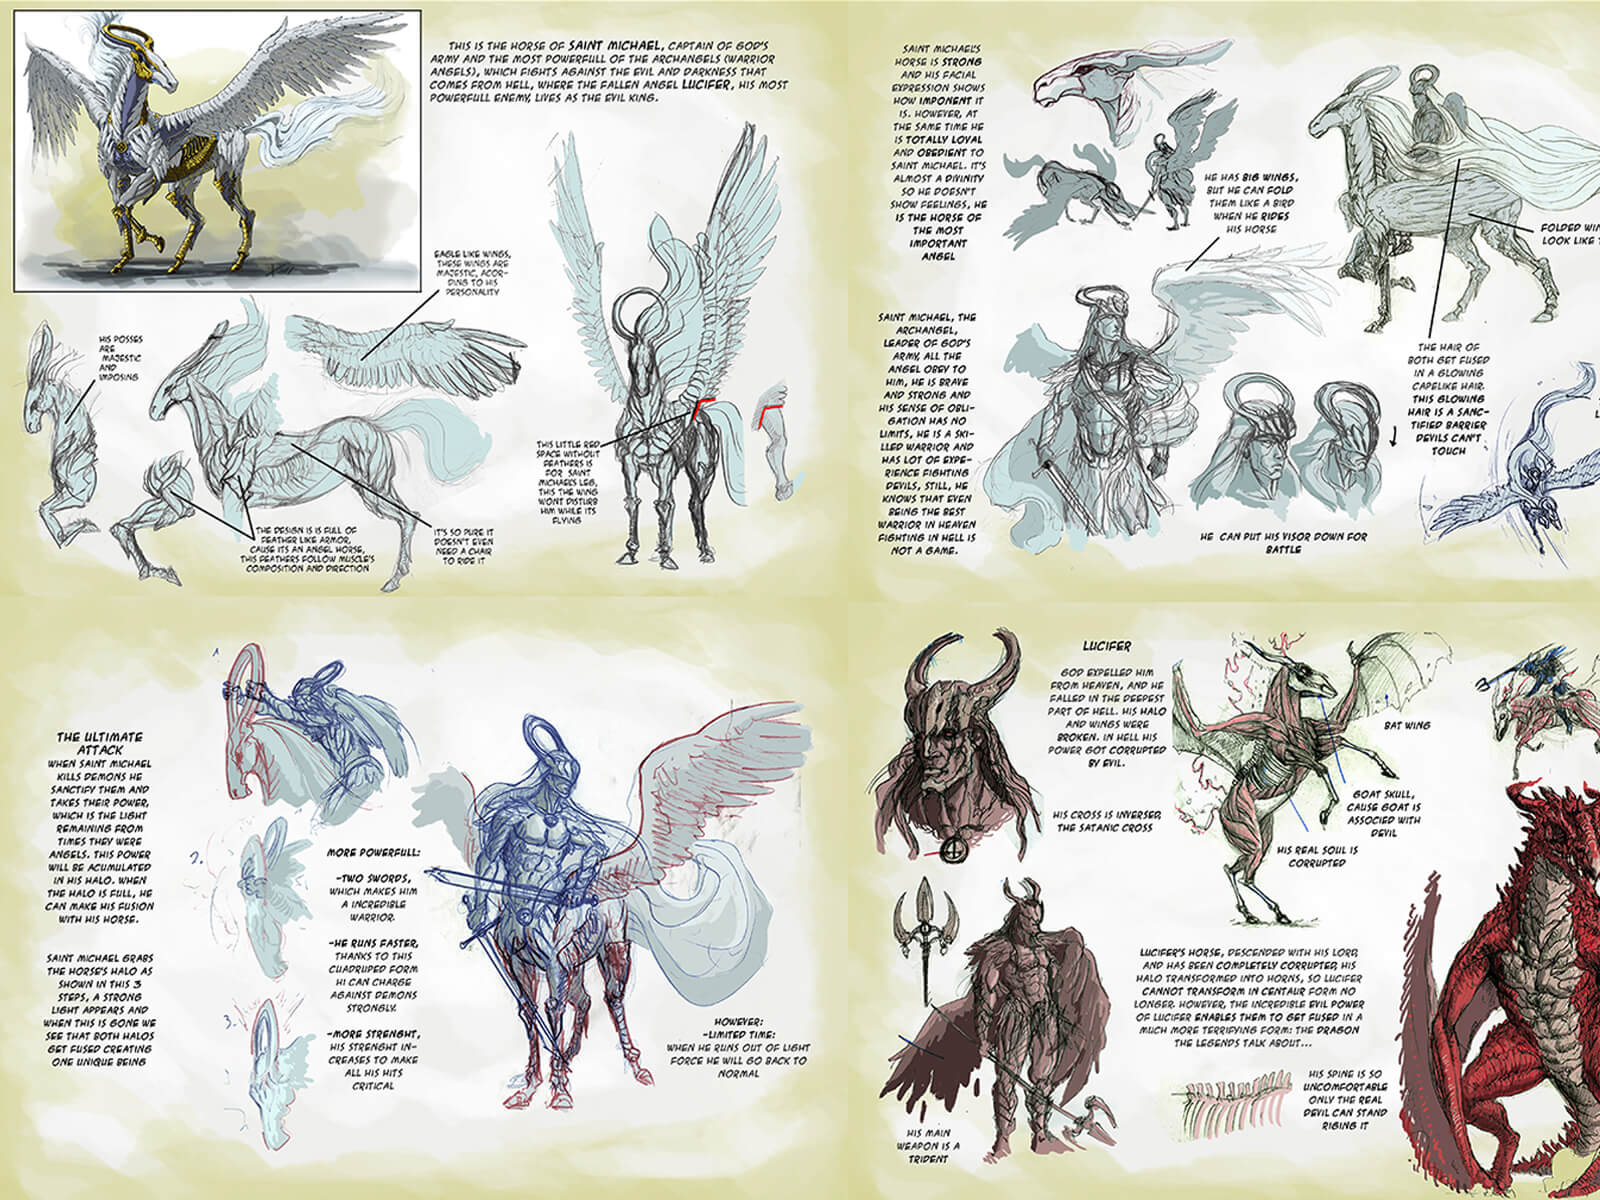 Designs and descriptions for an angelic character on horseback and a demonic figure on a dragon as they do battle.